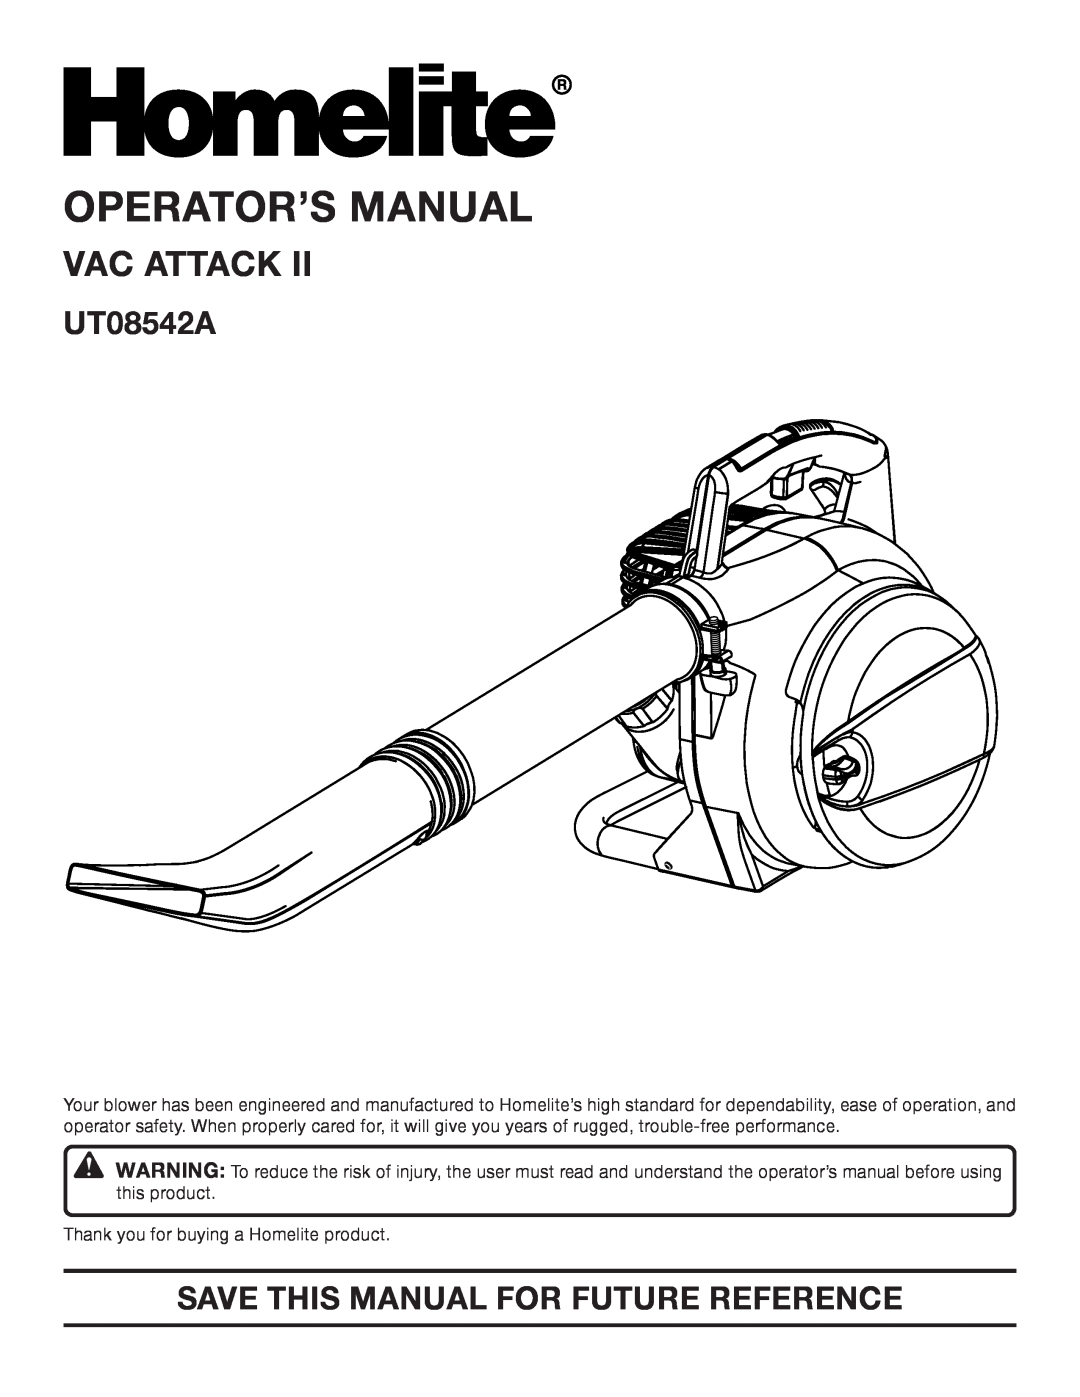 Homelite UT08542A manual Operator’S Manual, Vac Attack, Save This Manual For Future Reference 